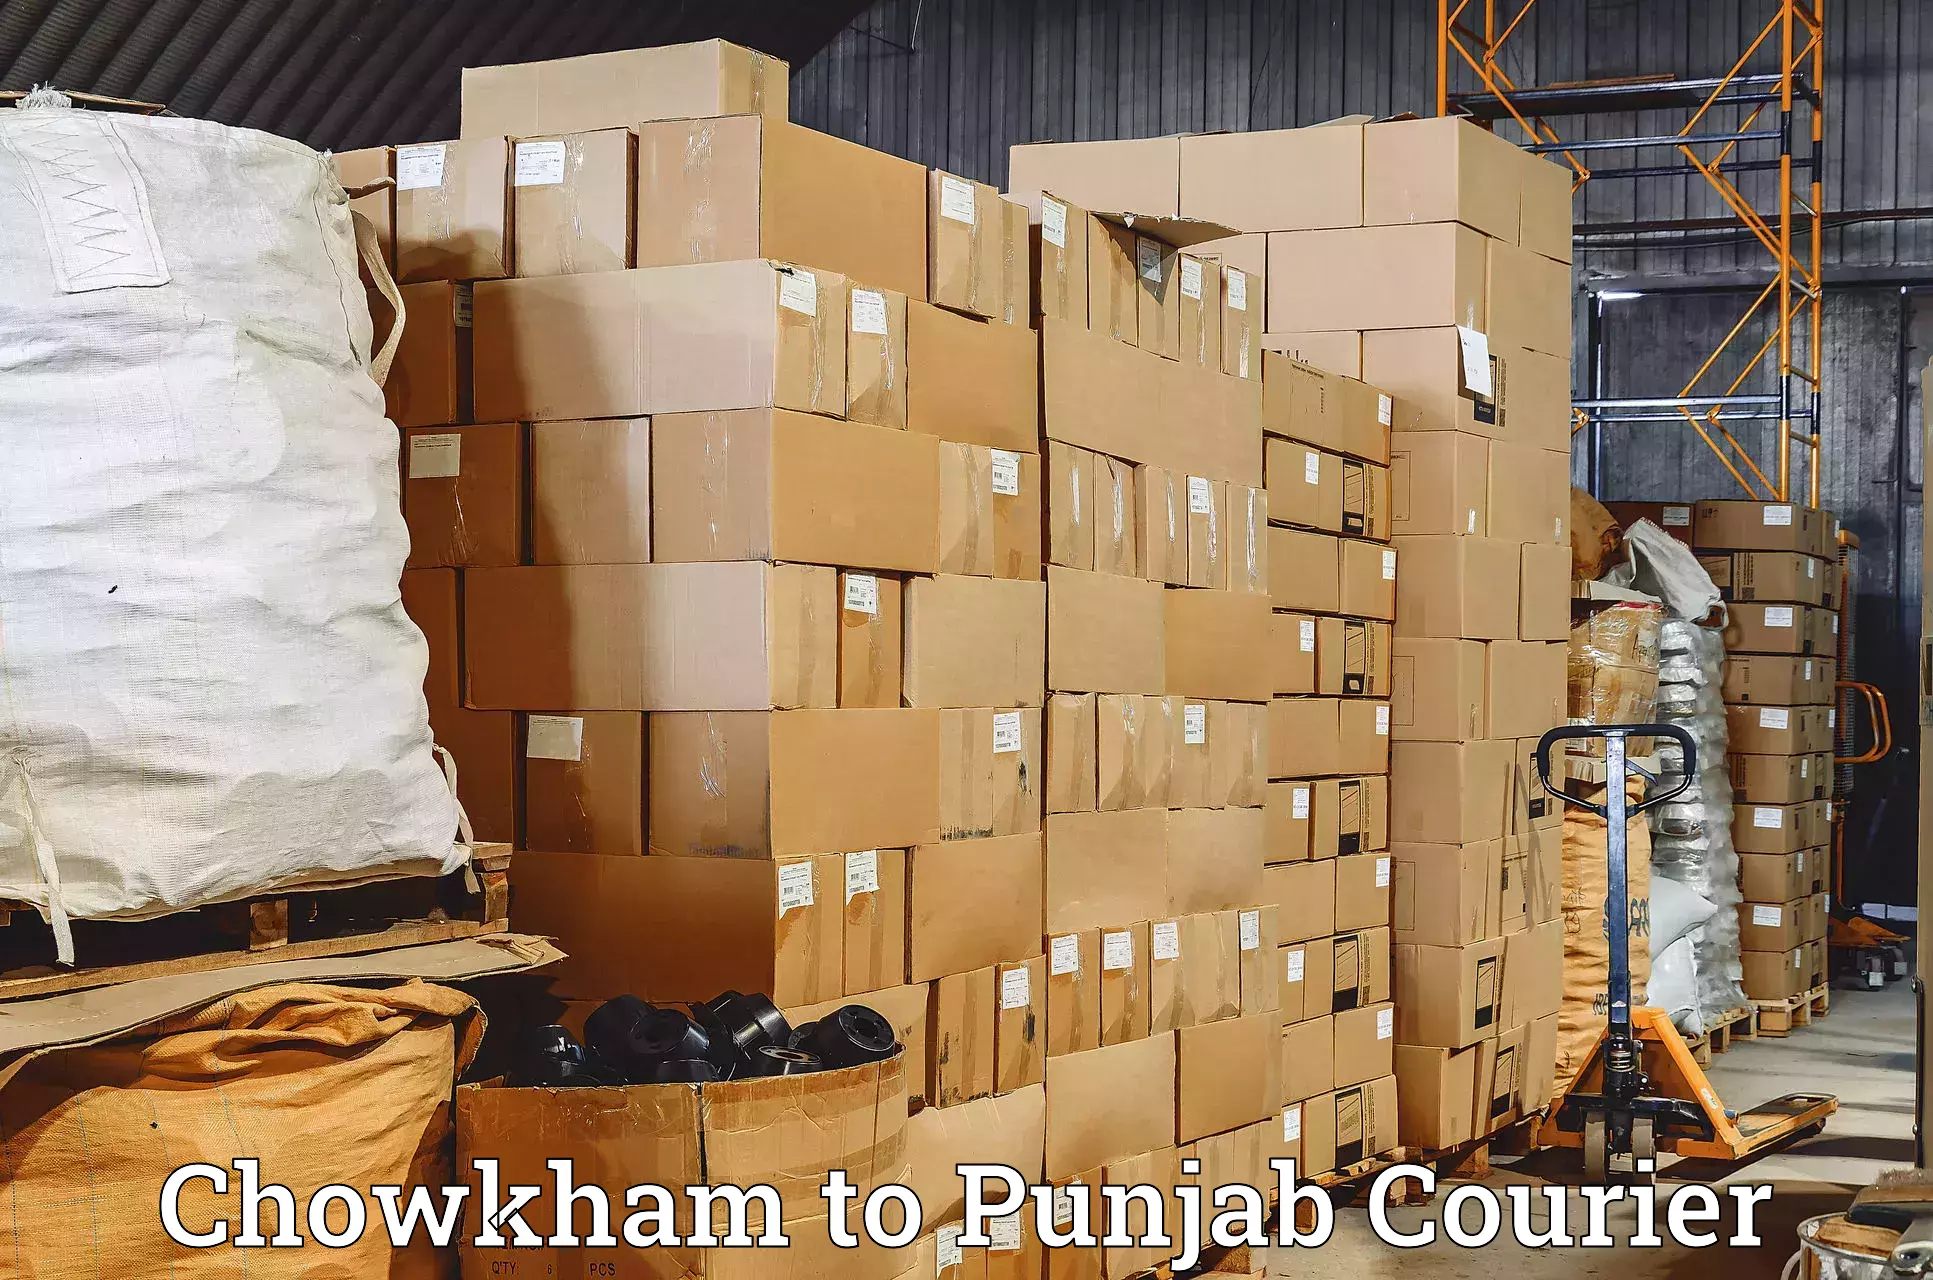 Courier service efficiency Chowkham to Pathankot